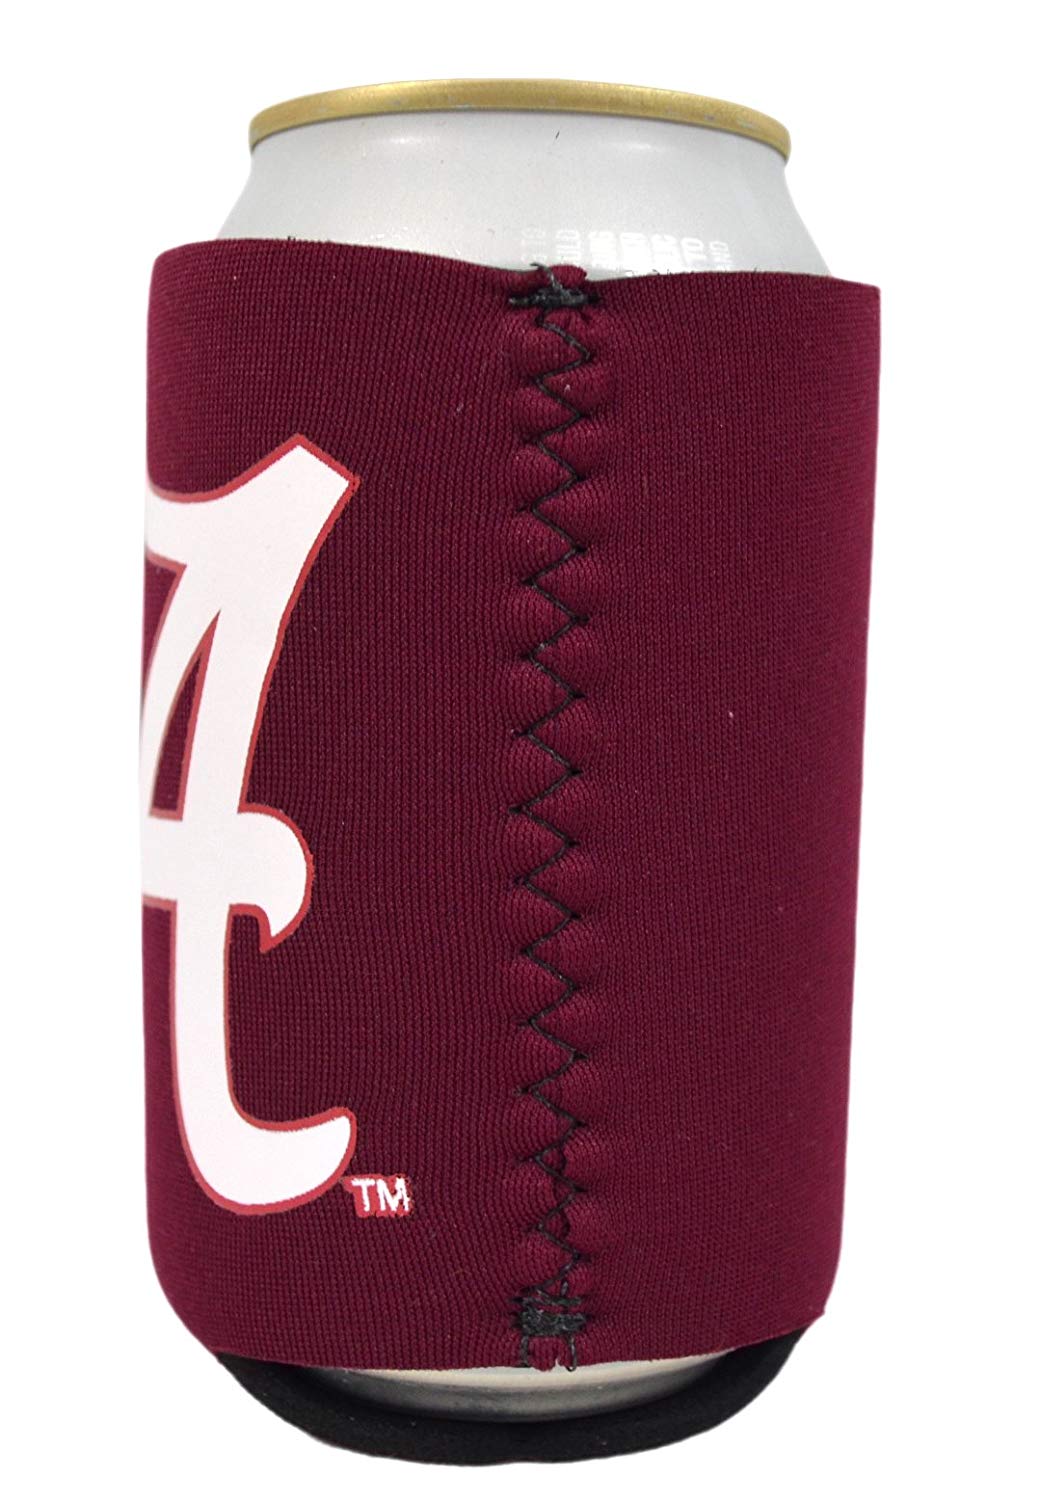 NCAA Fan Shop Authentic 2-Pack Insulated 12 Oz Can Cooler. Show School Pride At Home, Tailgating or At a Game. Great for Students, Alumni or Fans. (Alabama Crimson Tide)